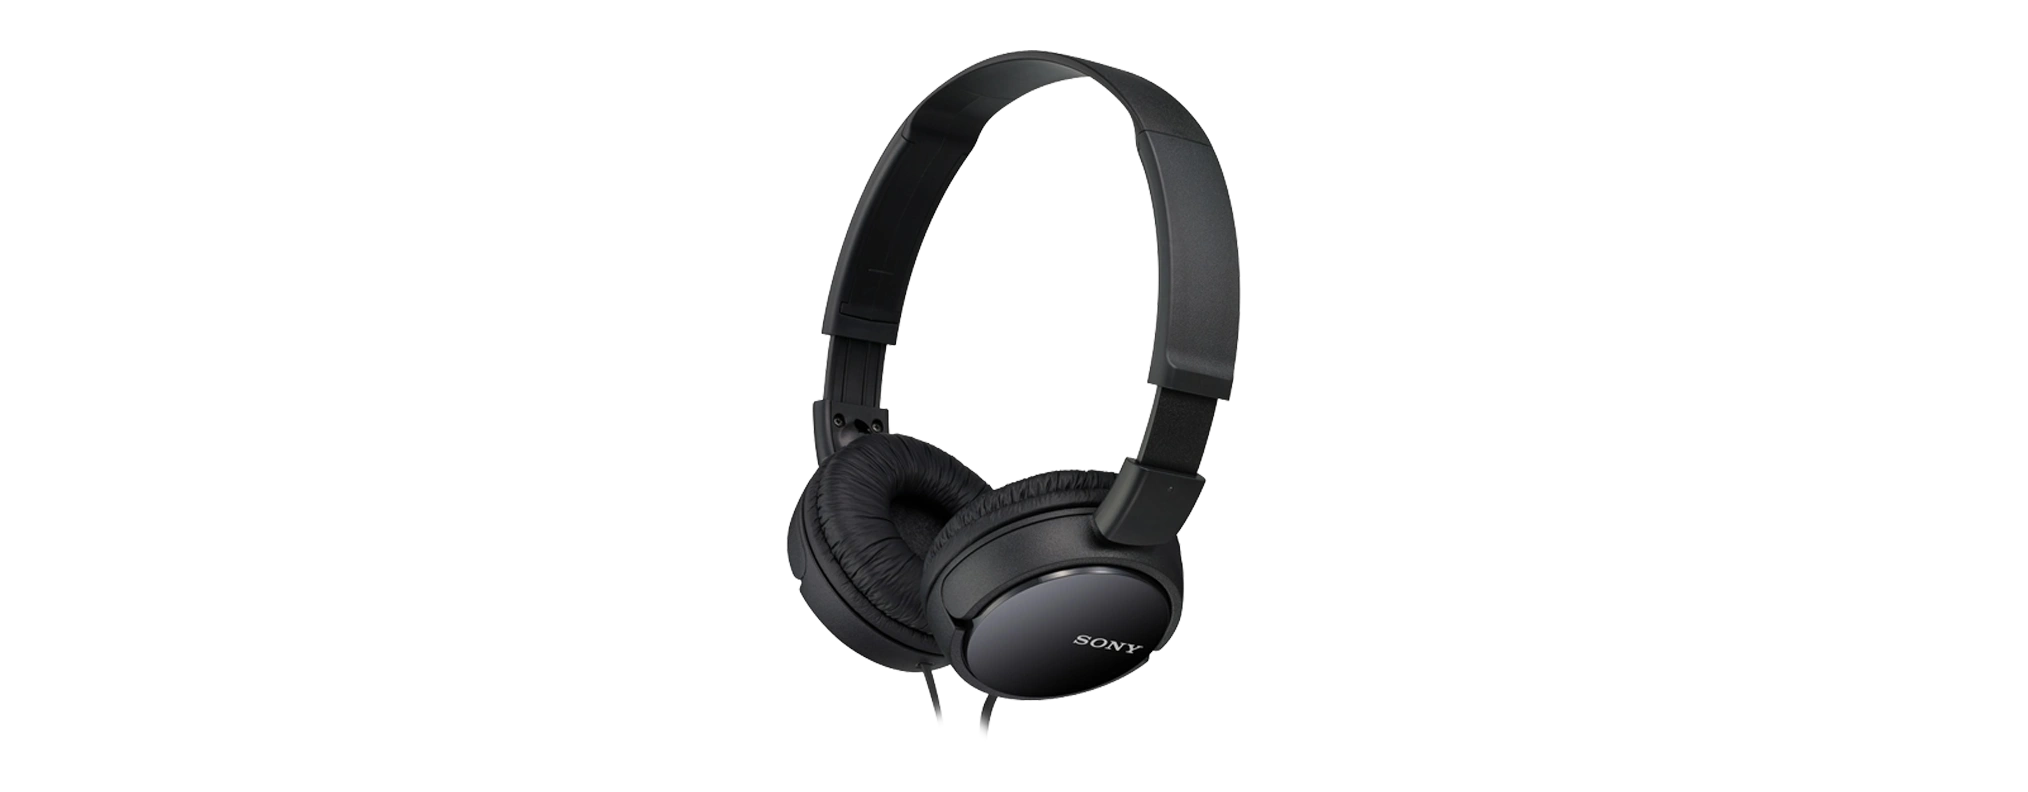 SONY MDR-ZX110 HEADPHONES-MDR-ZX110-Black